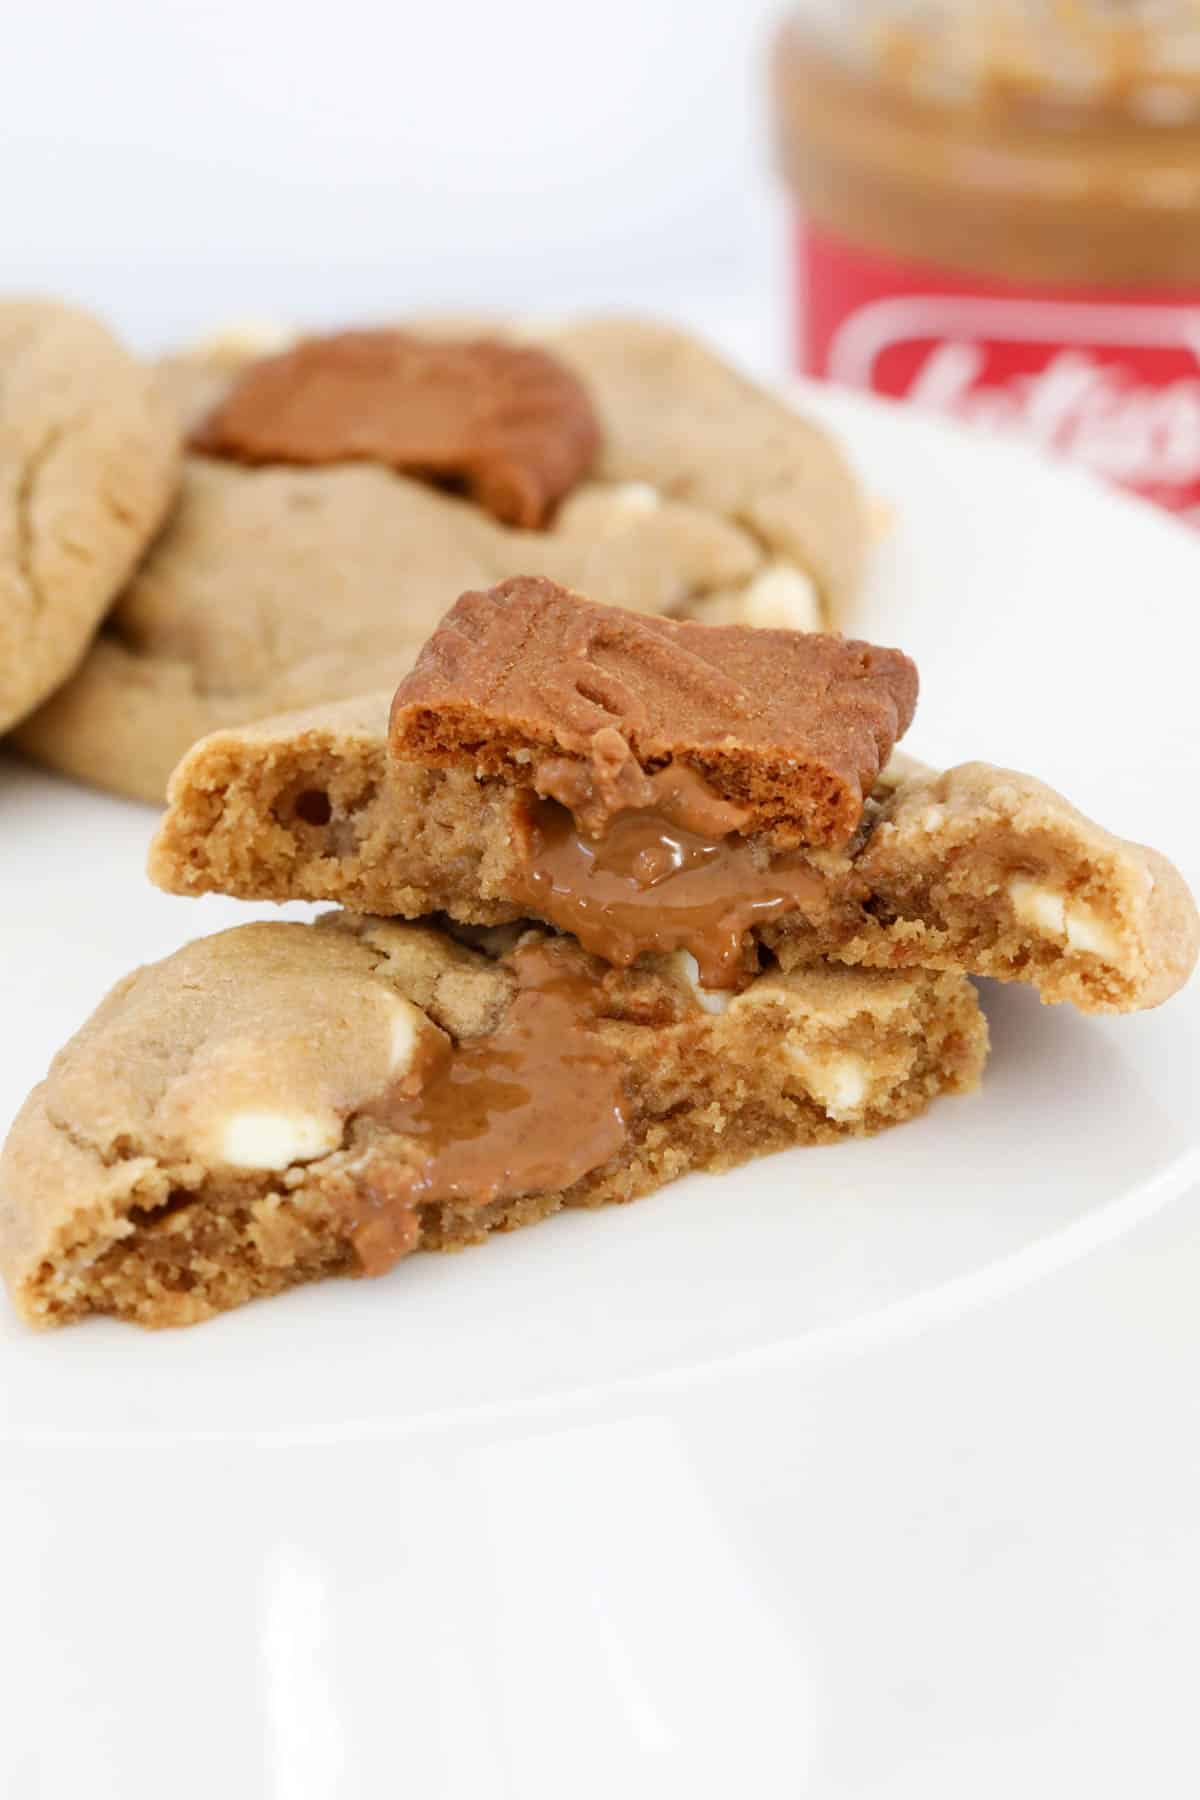 Biscoff cookies on a plate with the front one broken in half to show filling inside.